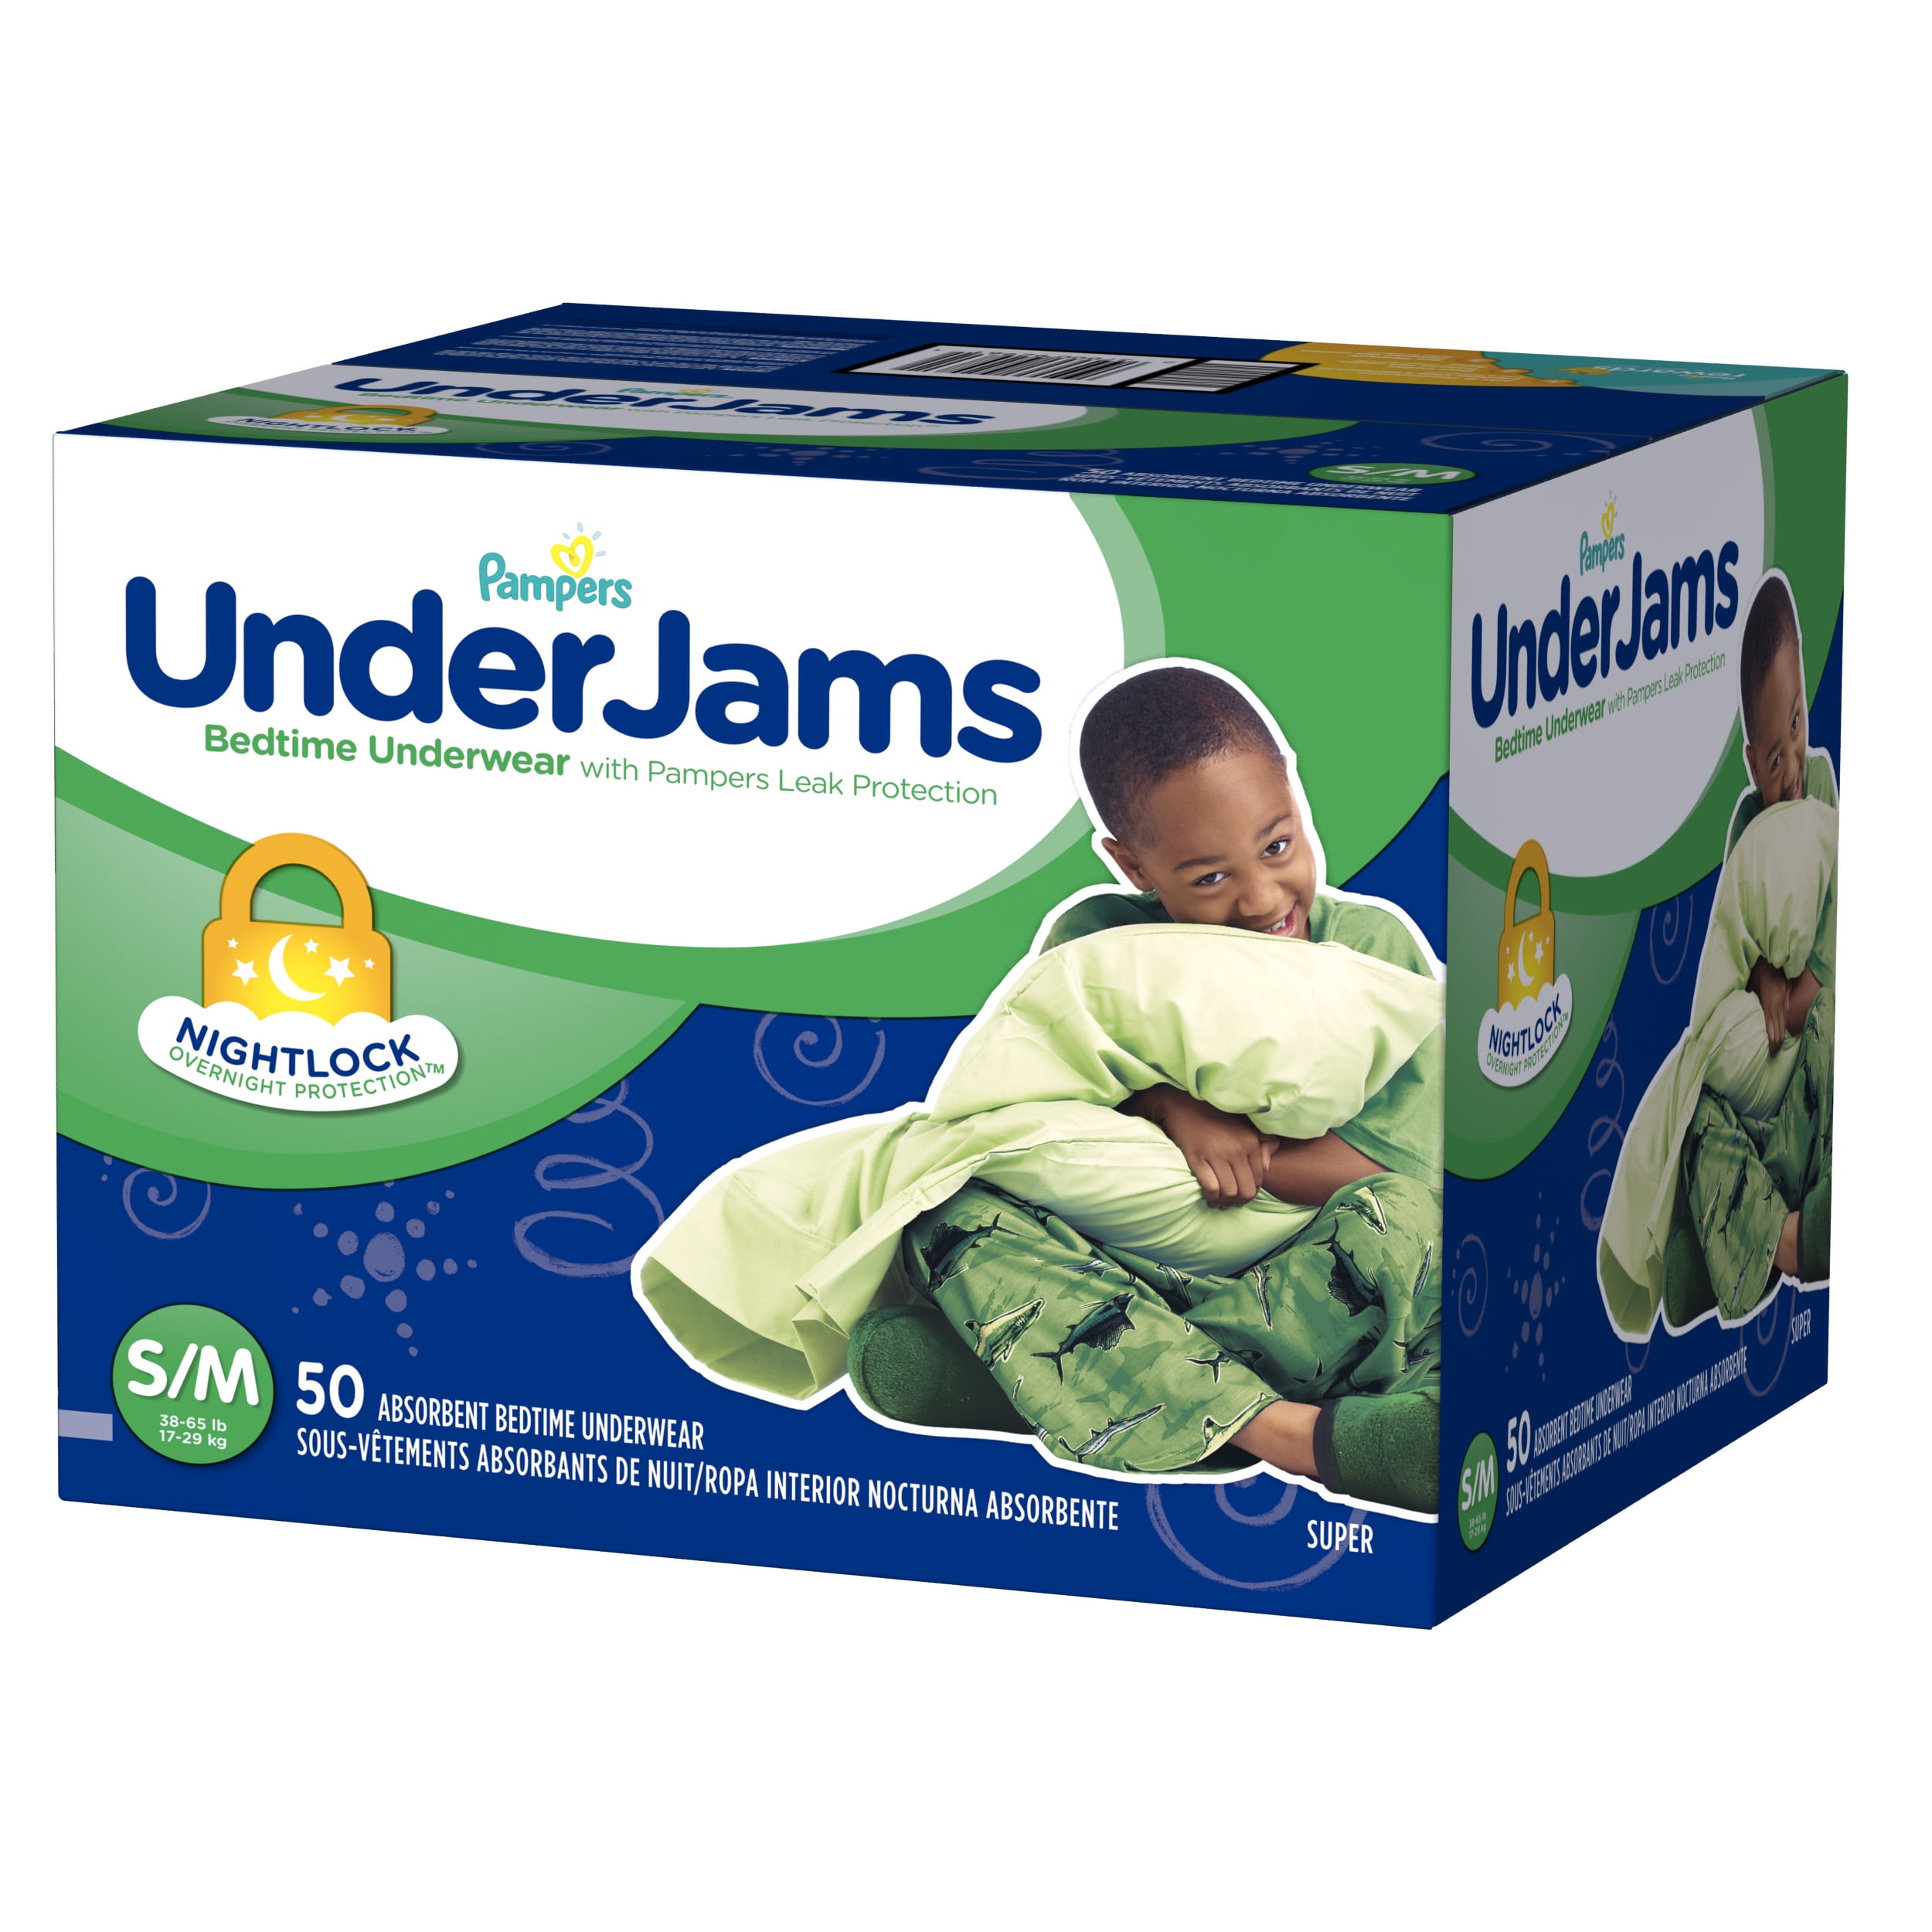 Pampers Underjams Size Chart